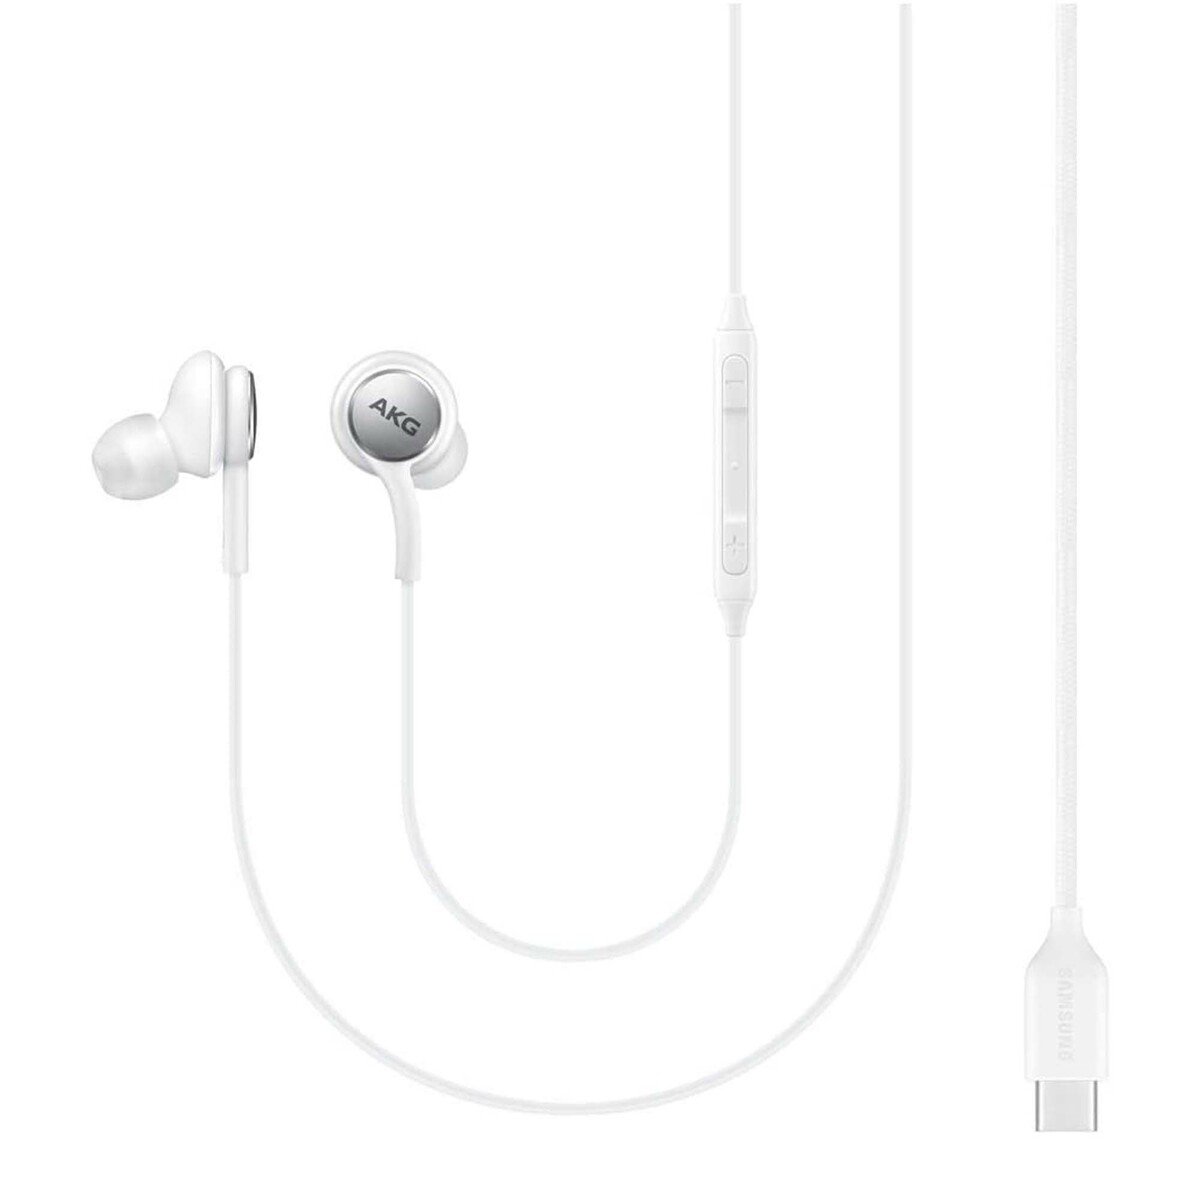 Samsung Stereo In-Ear | Online Earphones Type-C Price at Mobile EO-IC100 | (White) Free Hands Best Kuwait Lulu